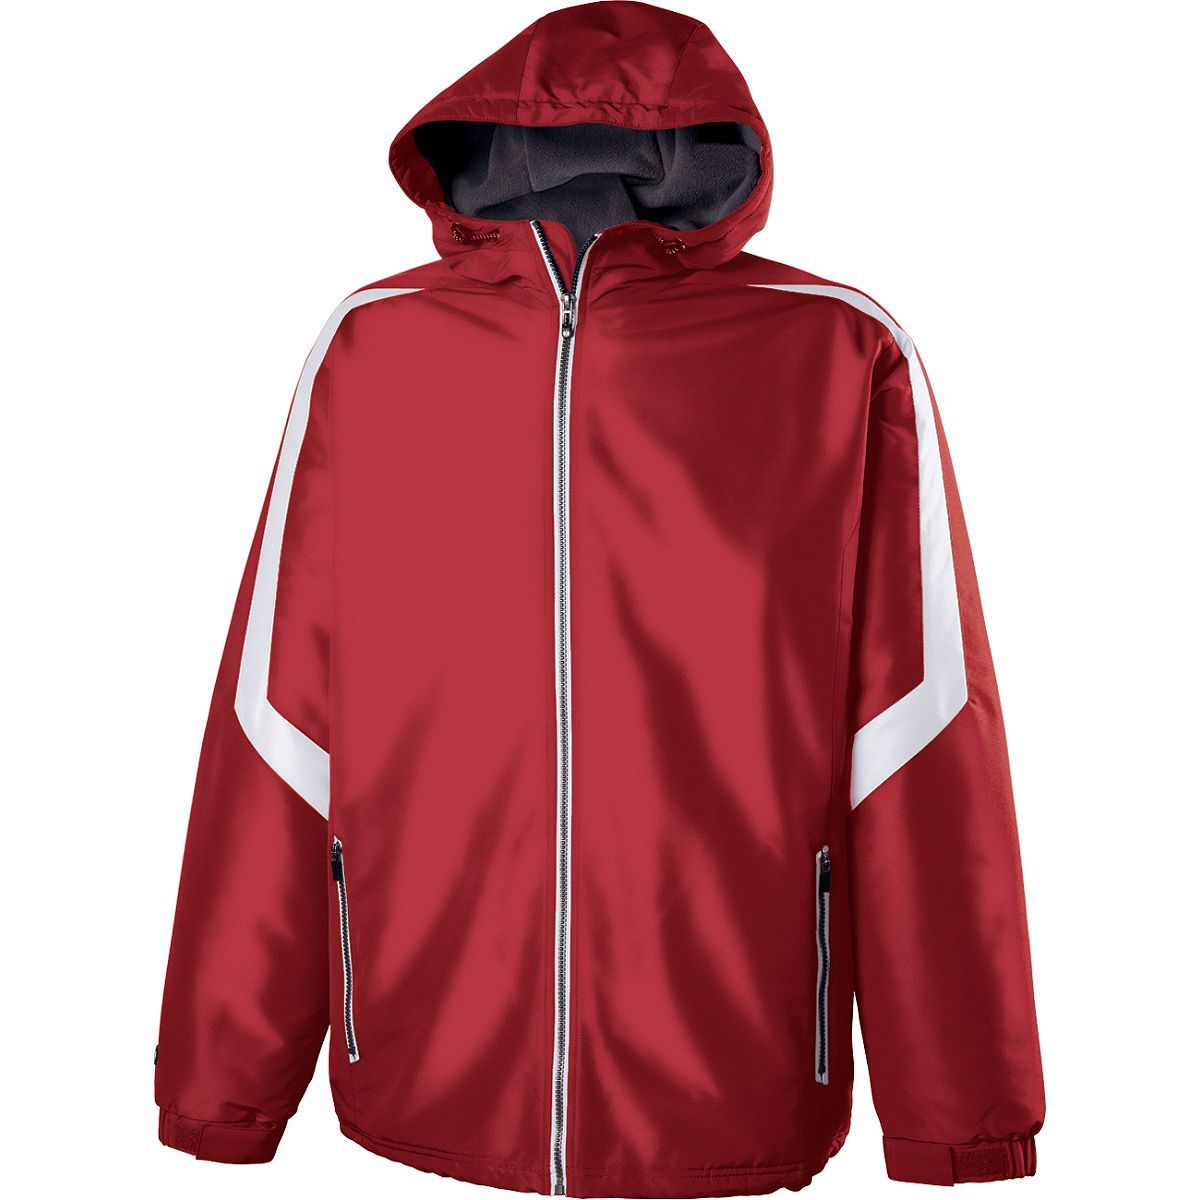 Holloway Sportswear XL Charger Jacket Scarlet/White 229059 - image 4 of 4